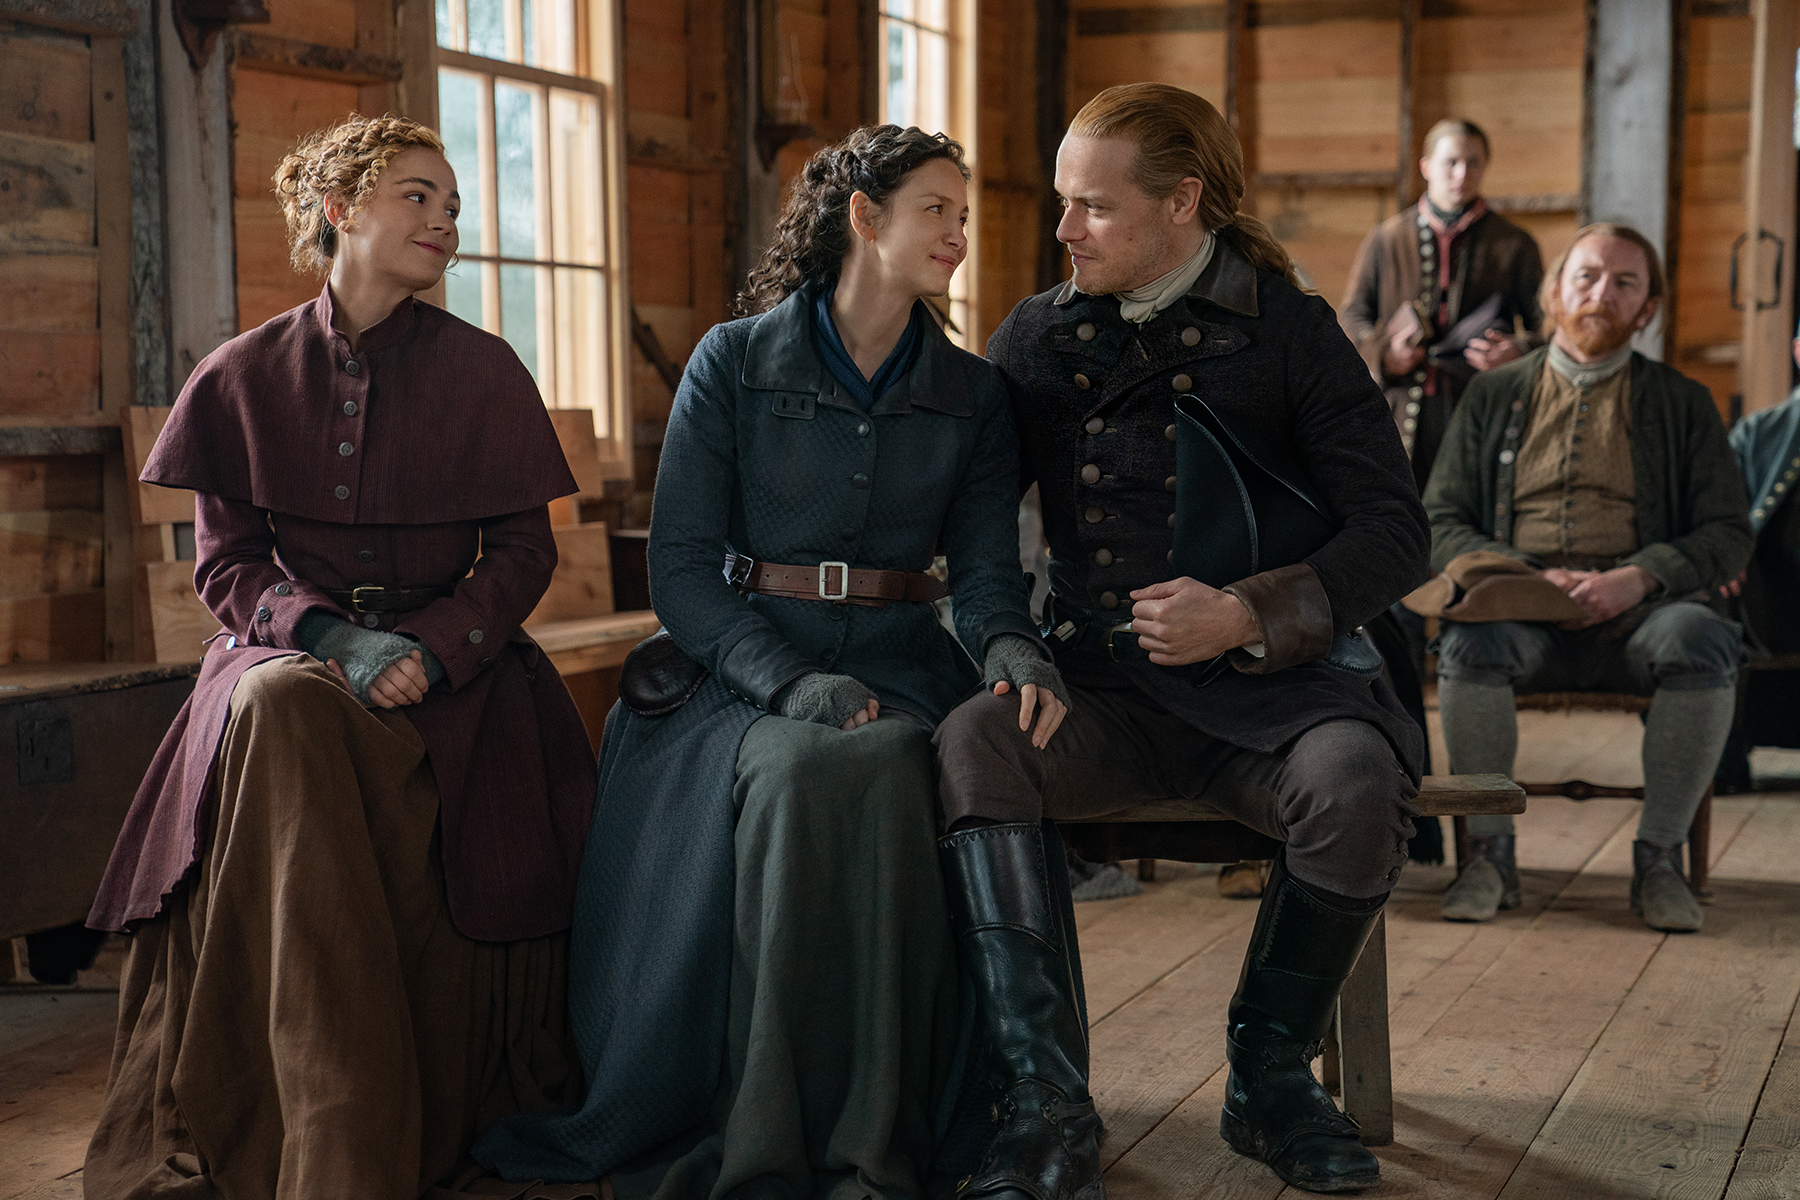 Outlander 6x06 "The World Turned Upside Down"